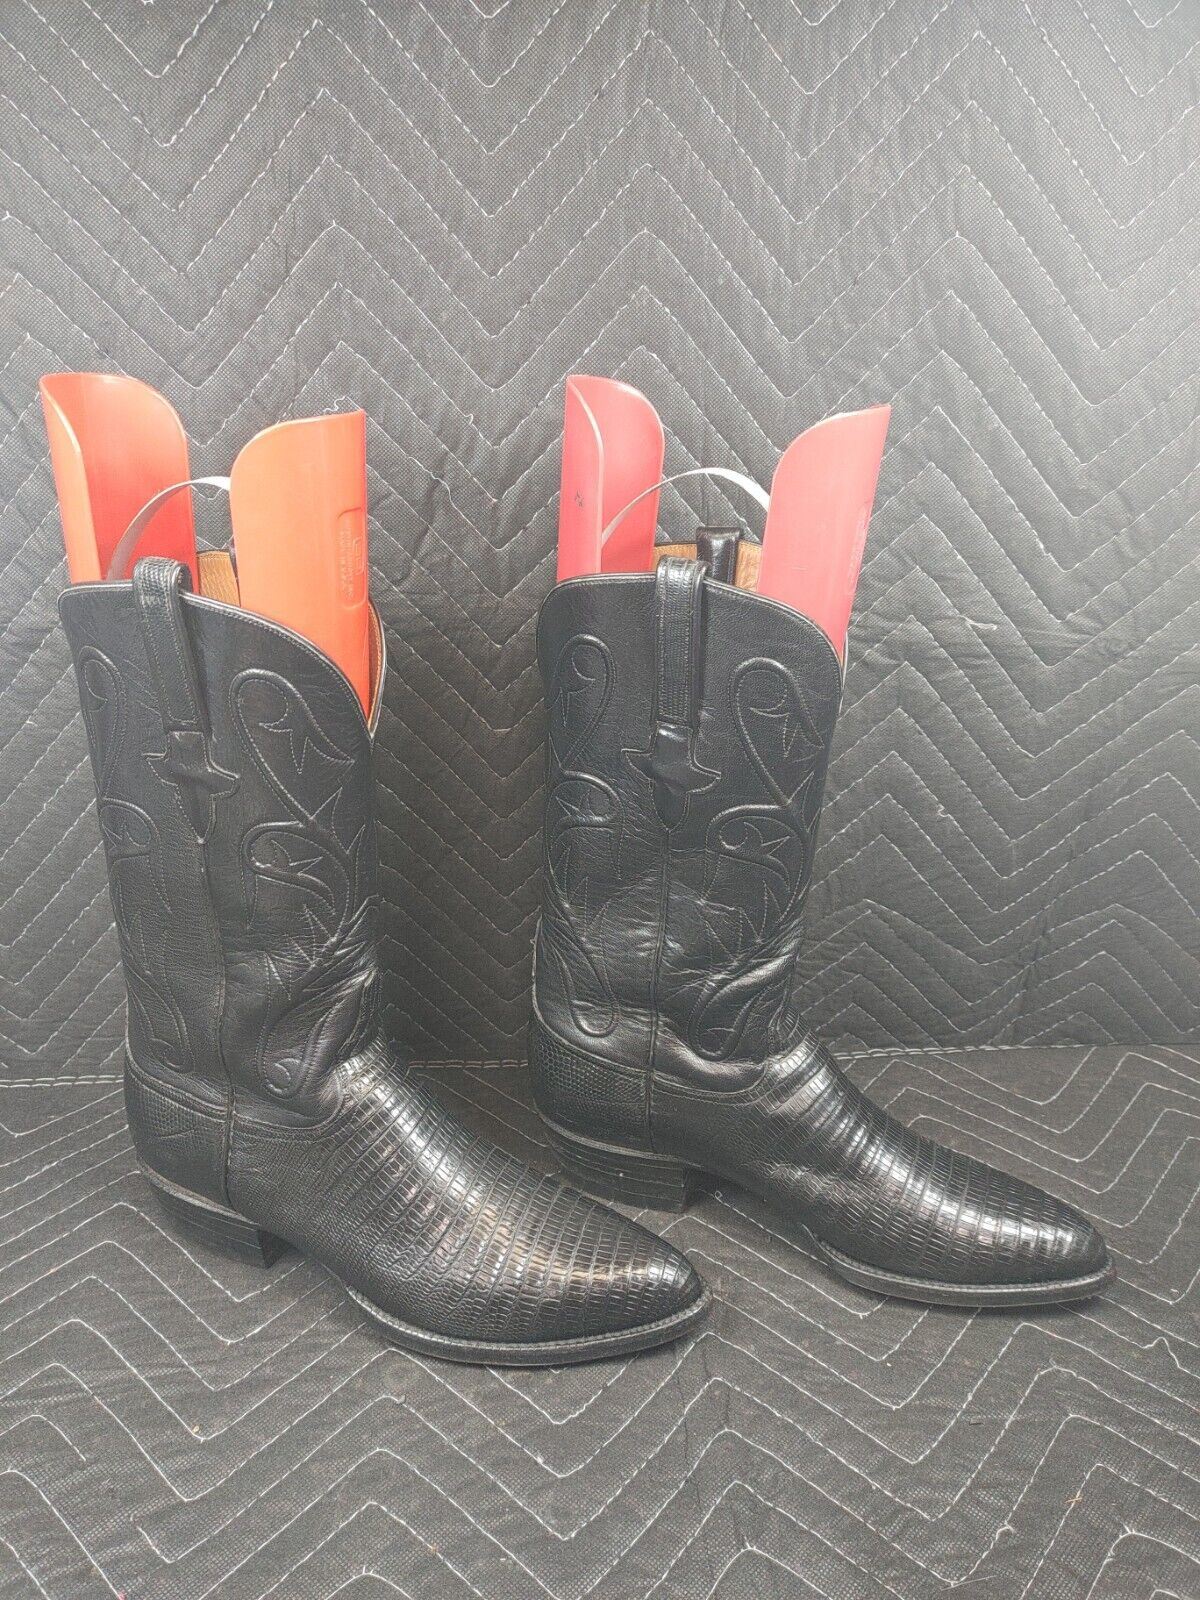 Lucchese Black Leather Boots Western Cowboy Men's 8.5 D L608303 USA Made